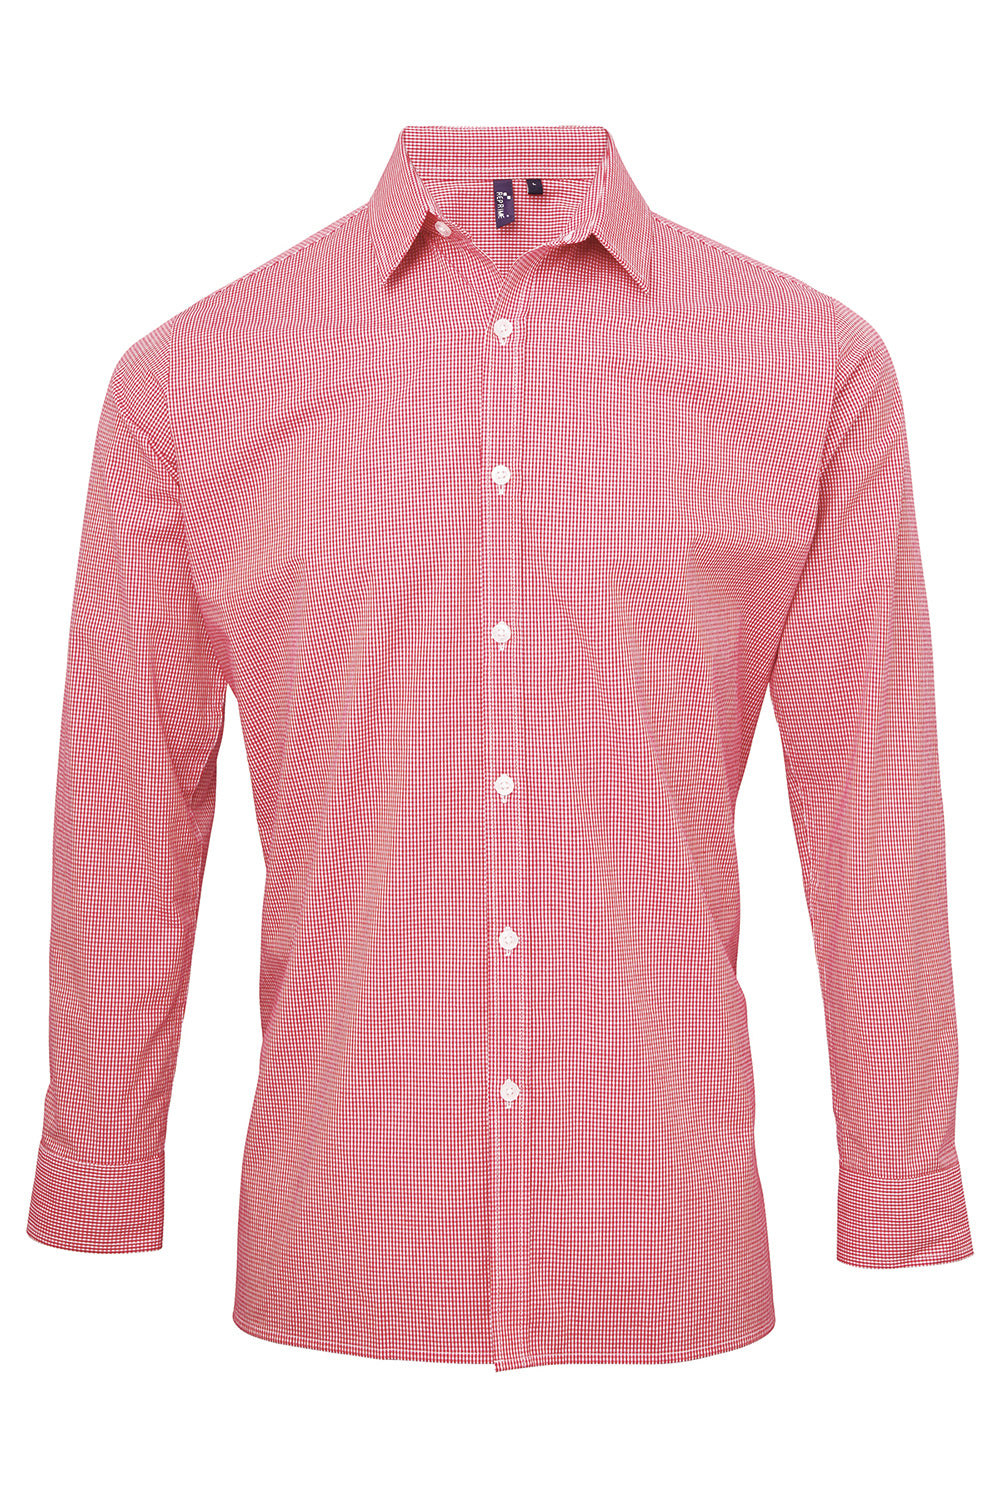 Artisan Collection RP220 Mens Microcheck Gingham Long Sleeve Button Down Shirt Red/White Model Flat Front